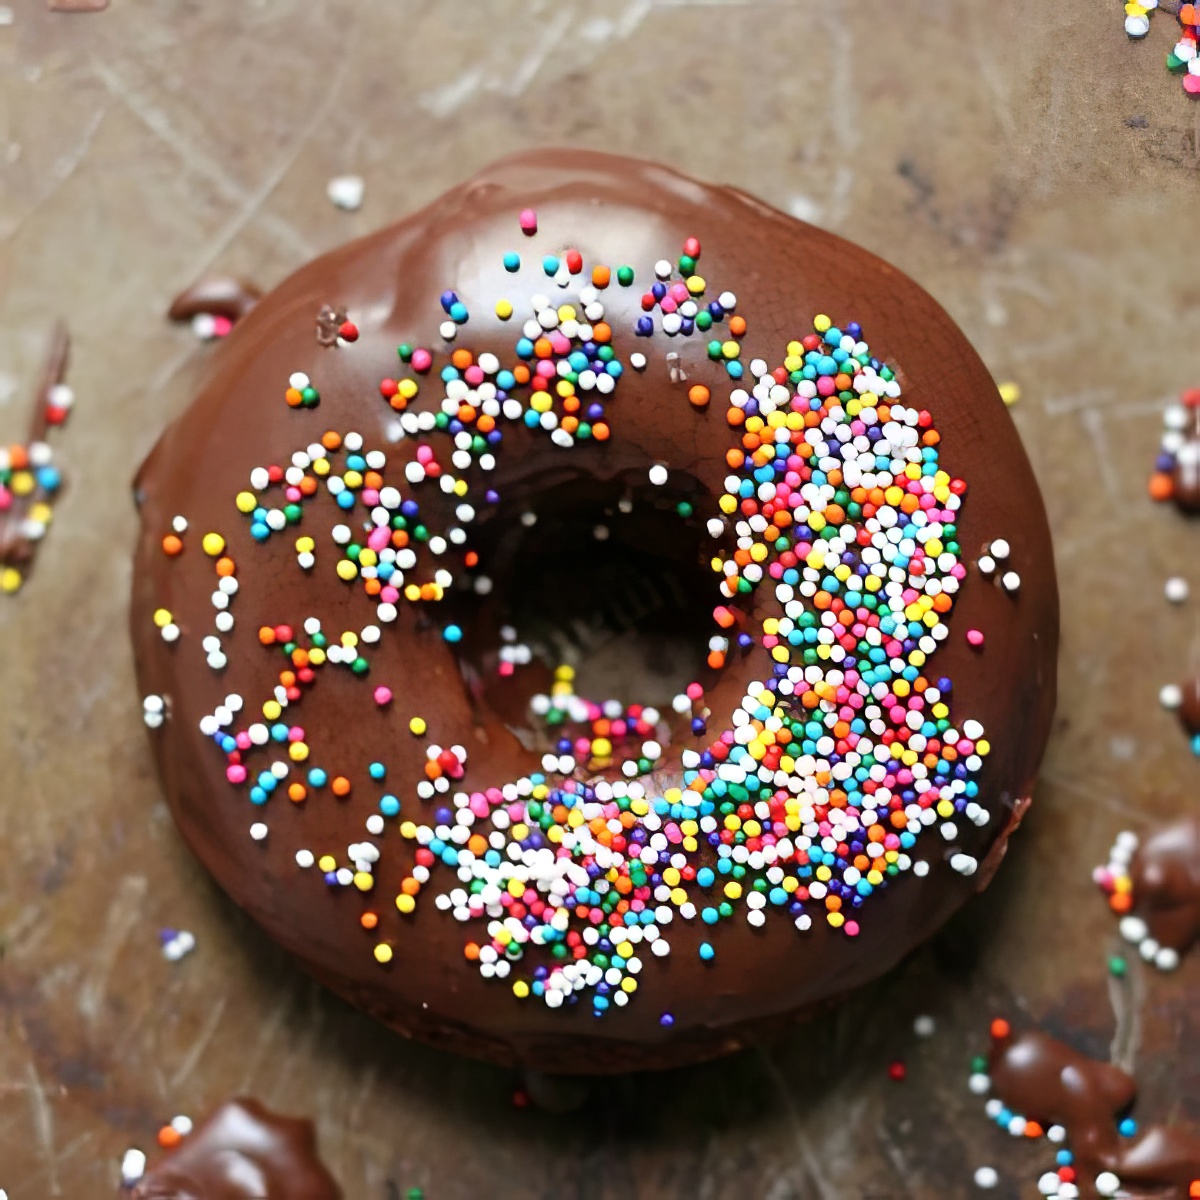 Check out this easy and yummy chocolate glazed donuts for breakfast with your kids!